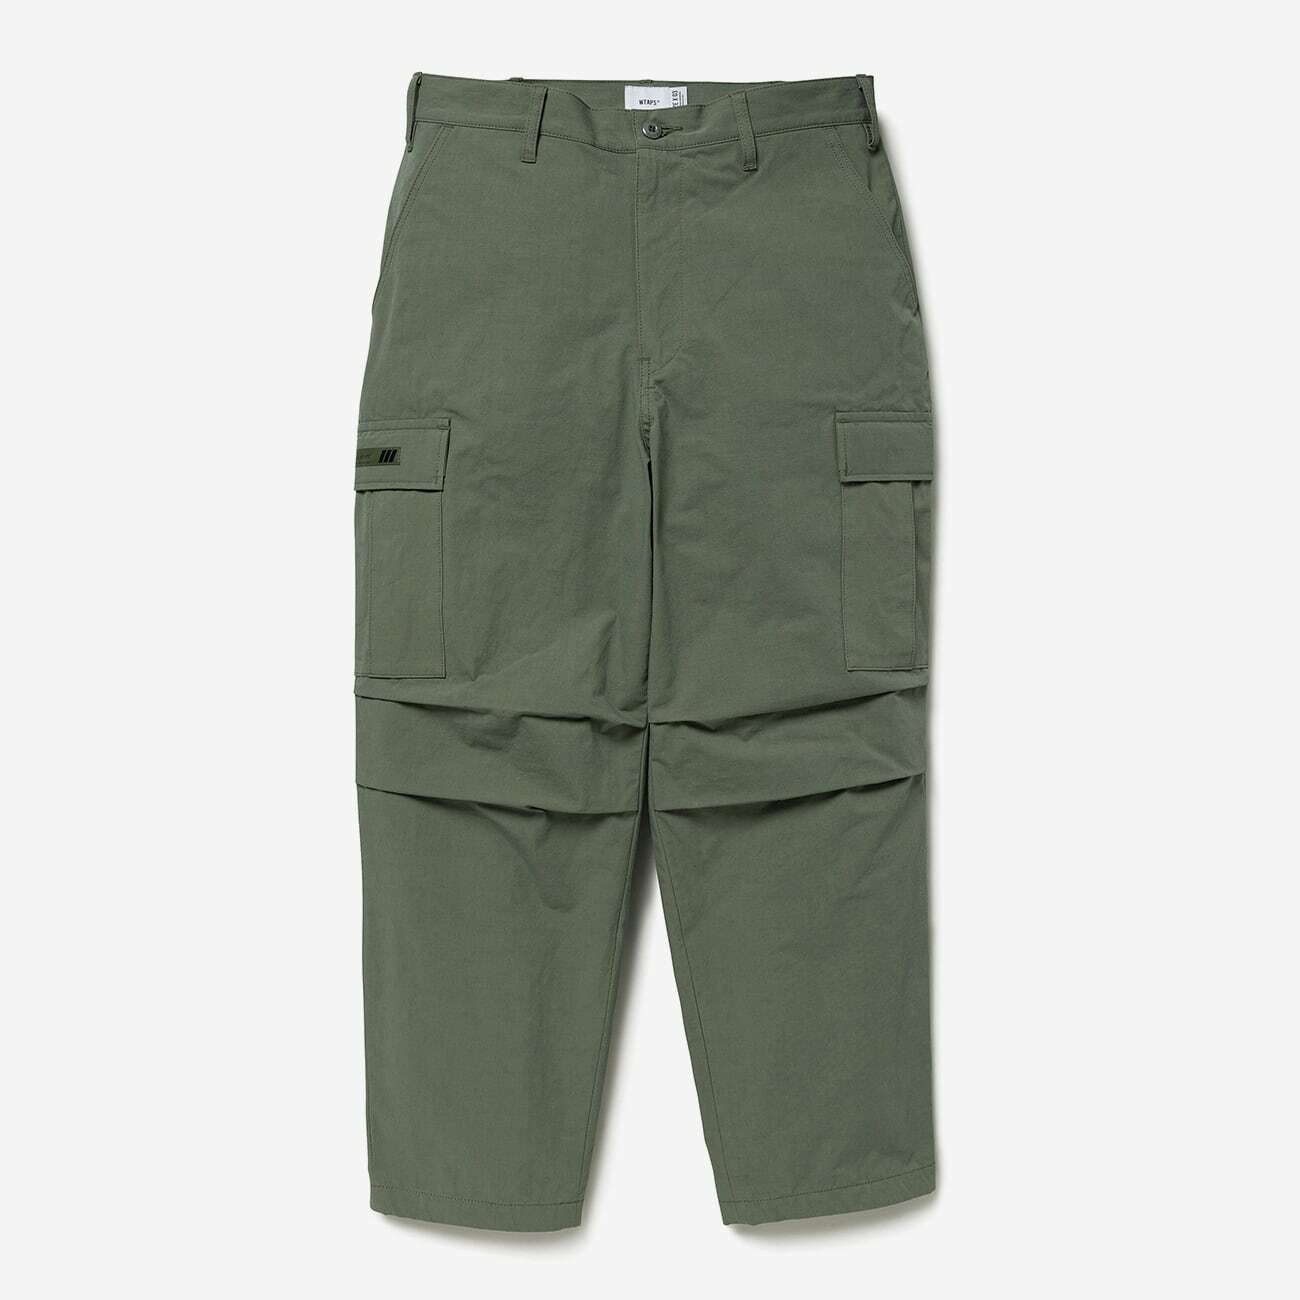 WTAPS 231WVDT-PTM09 MILT9601 / TROUSERS / NYCO. RIPSTOP